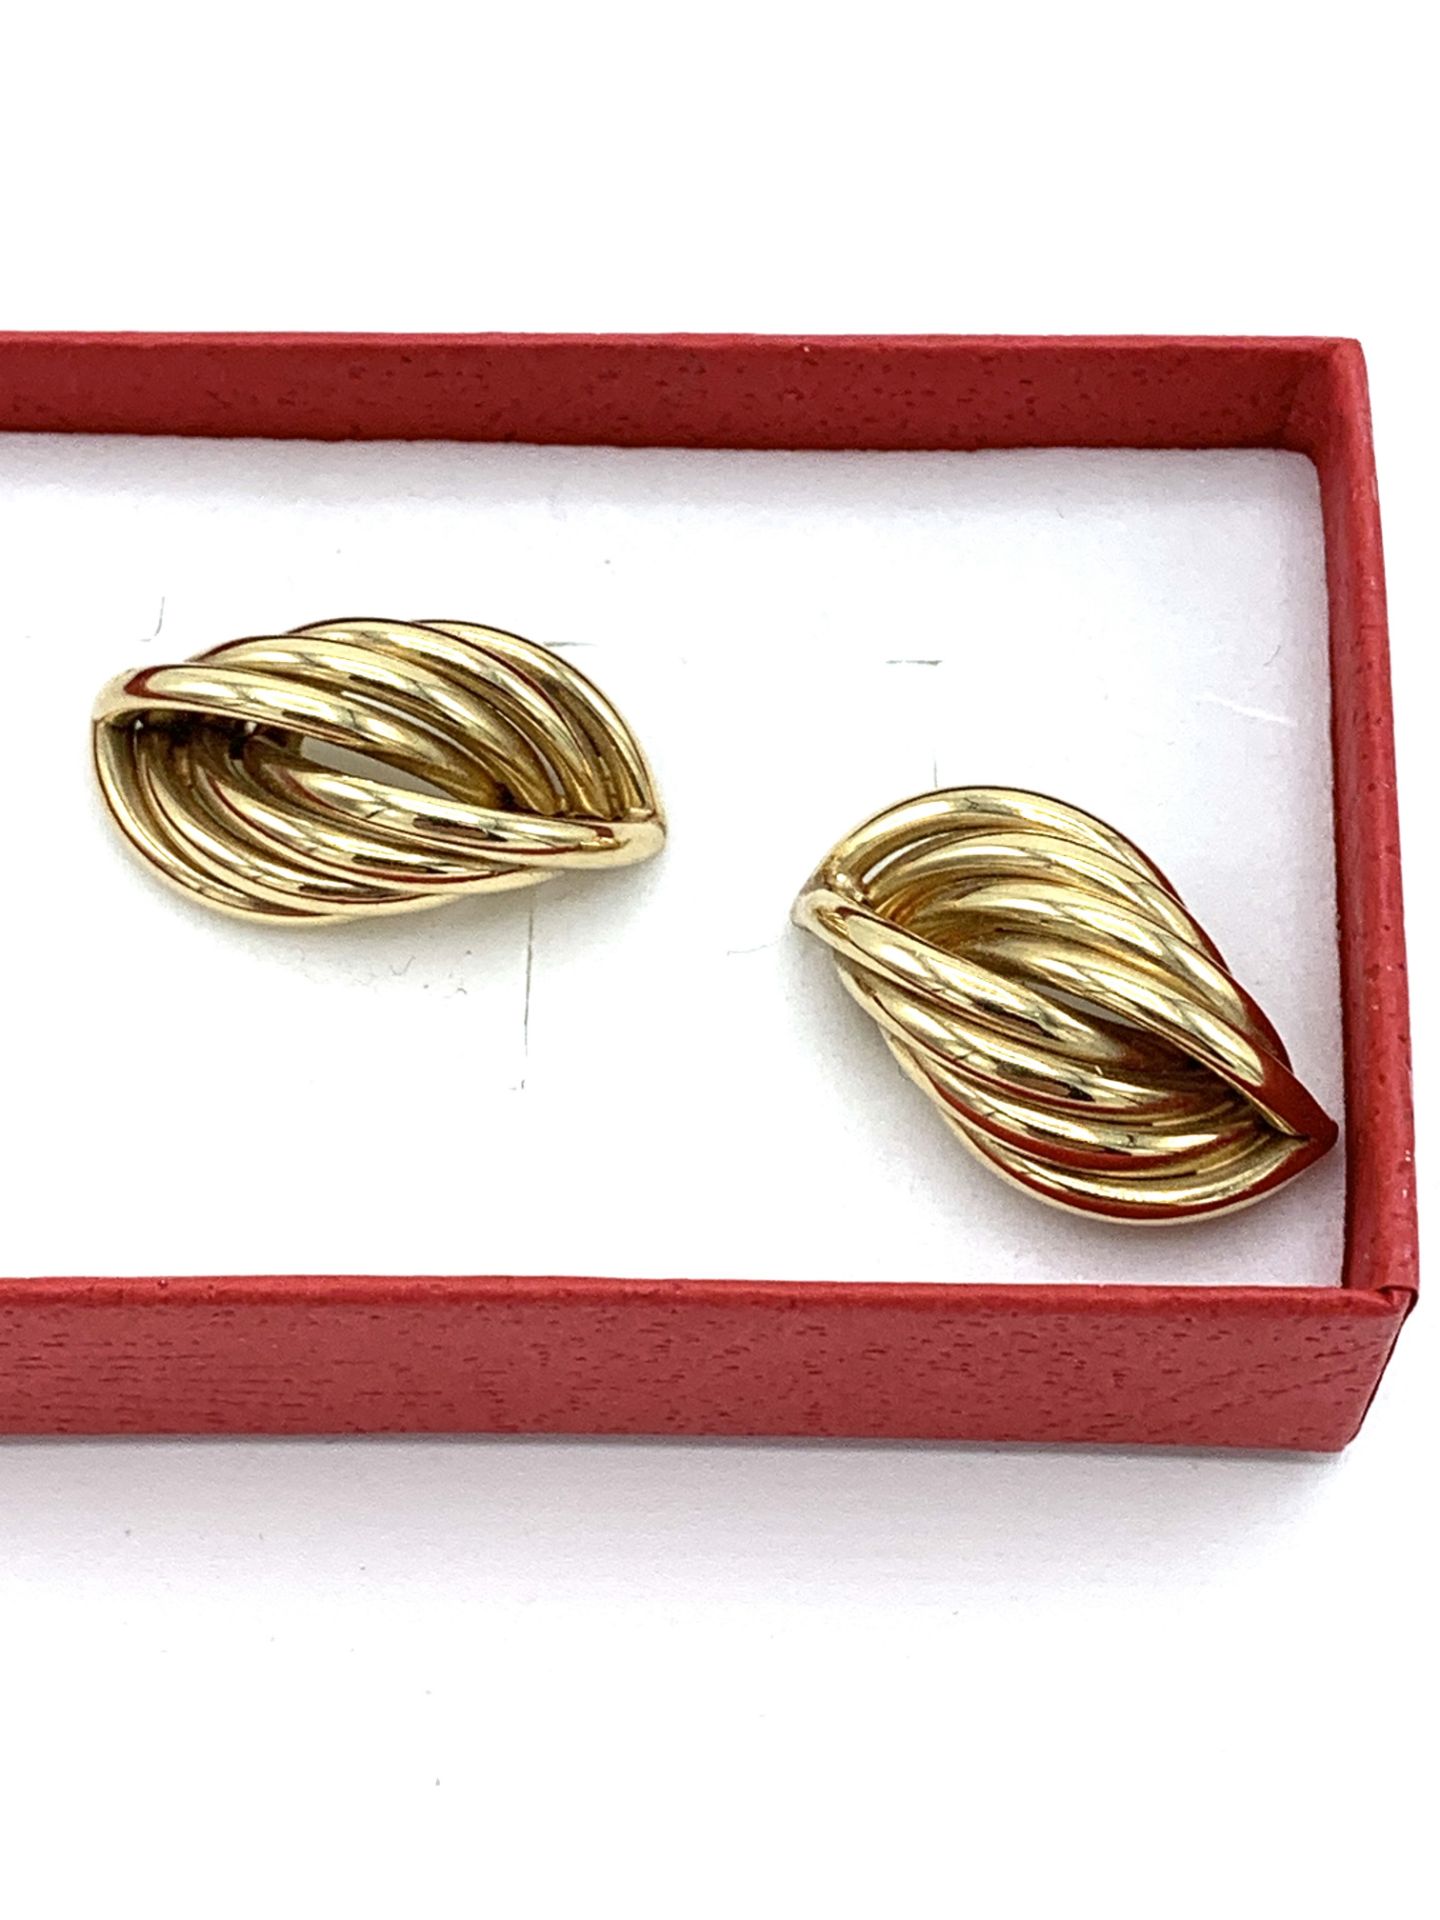 9ct gold leaf shaped earrings. - Image 2 of 3